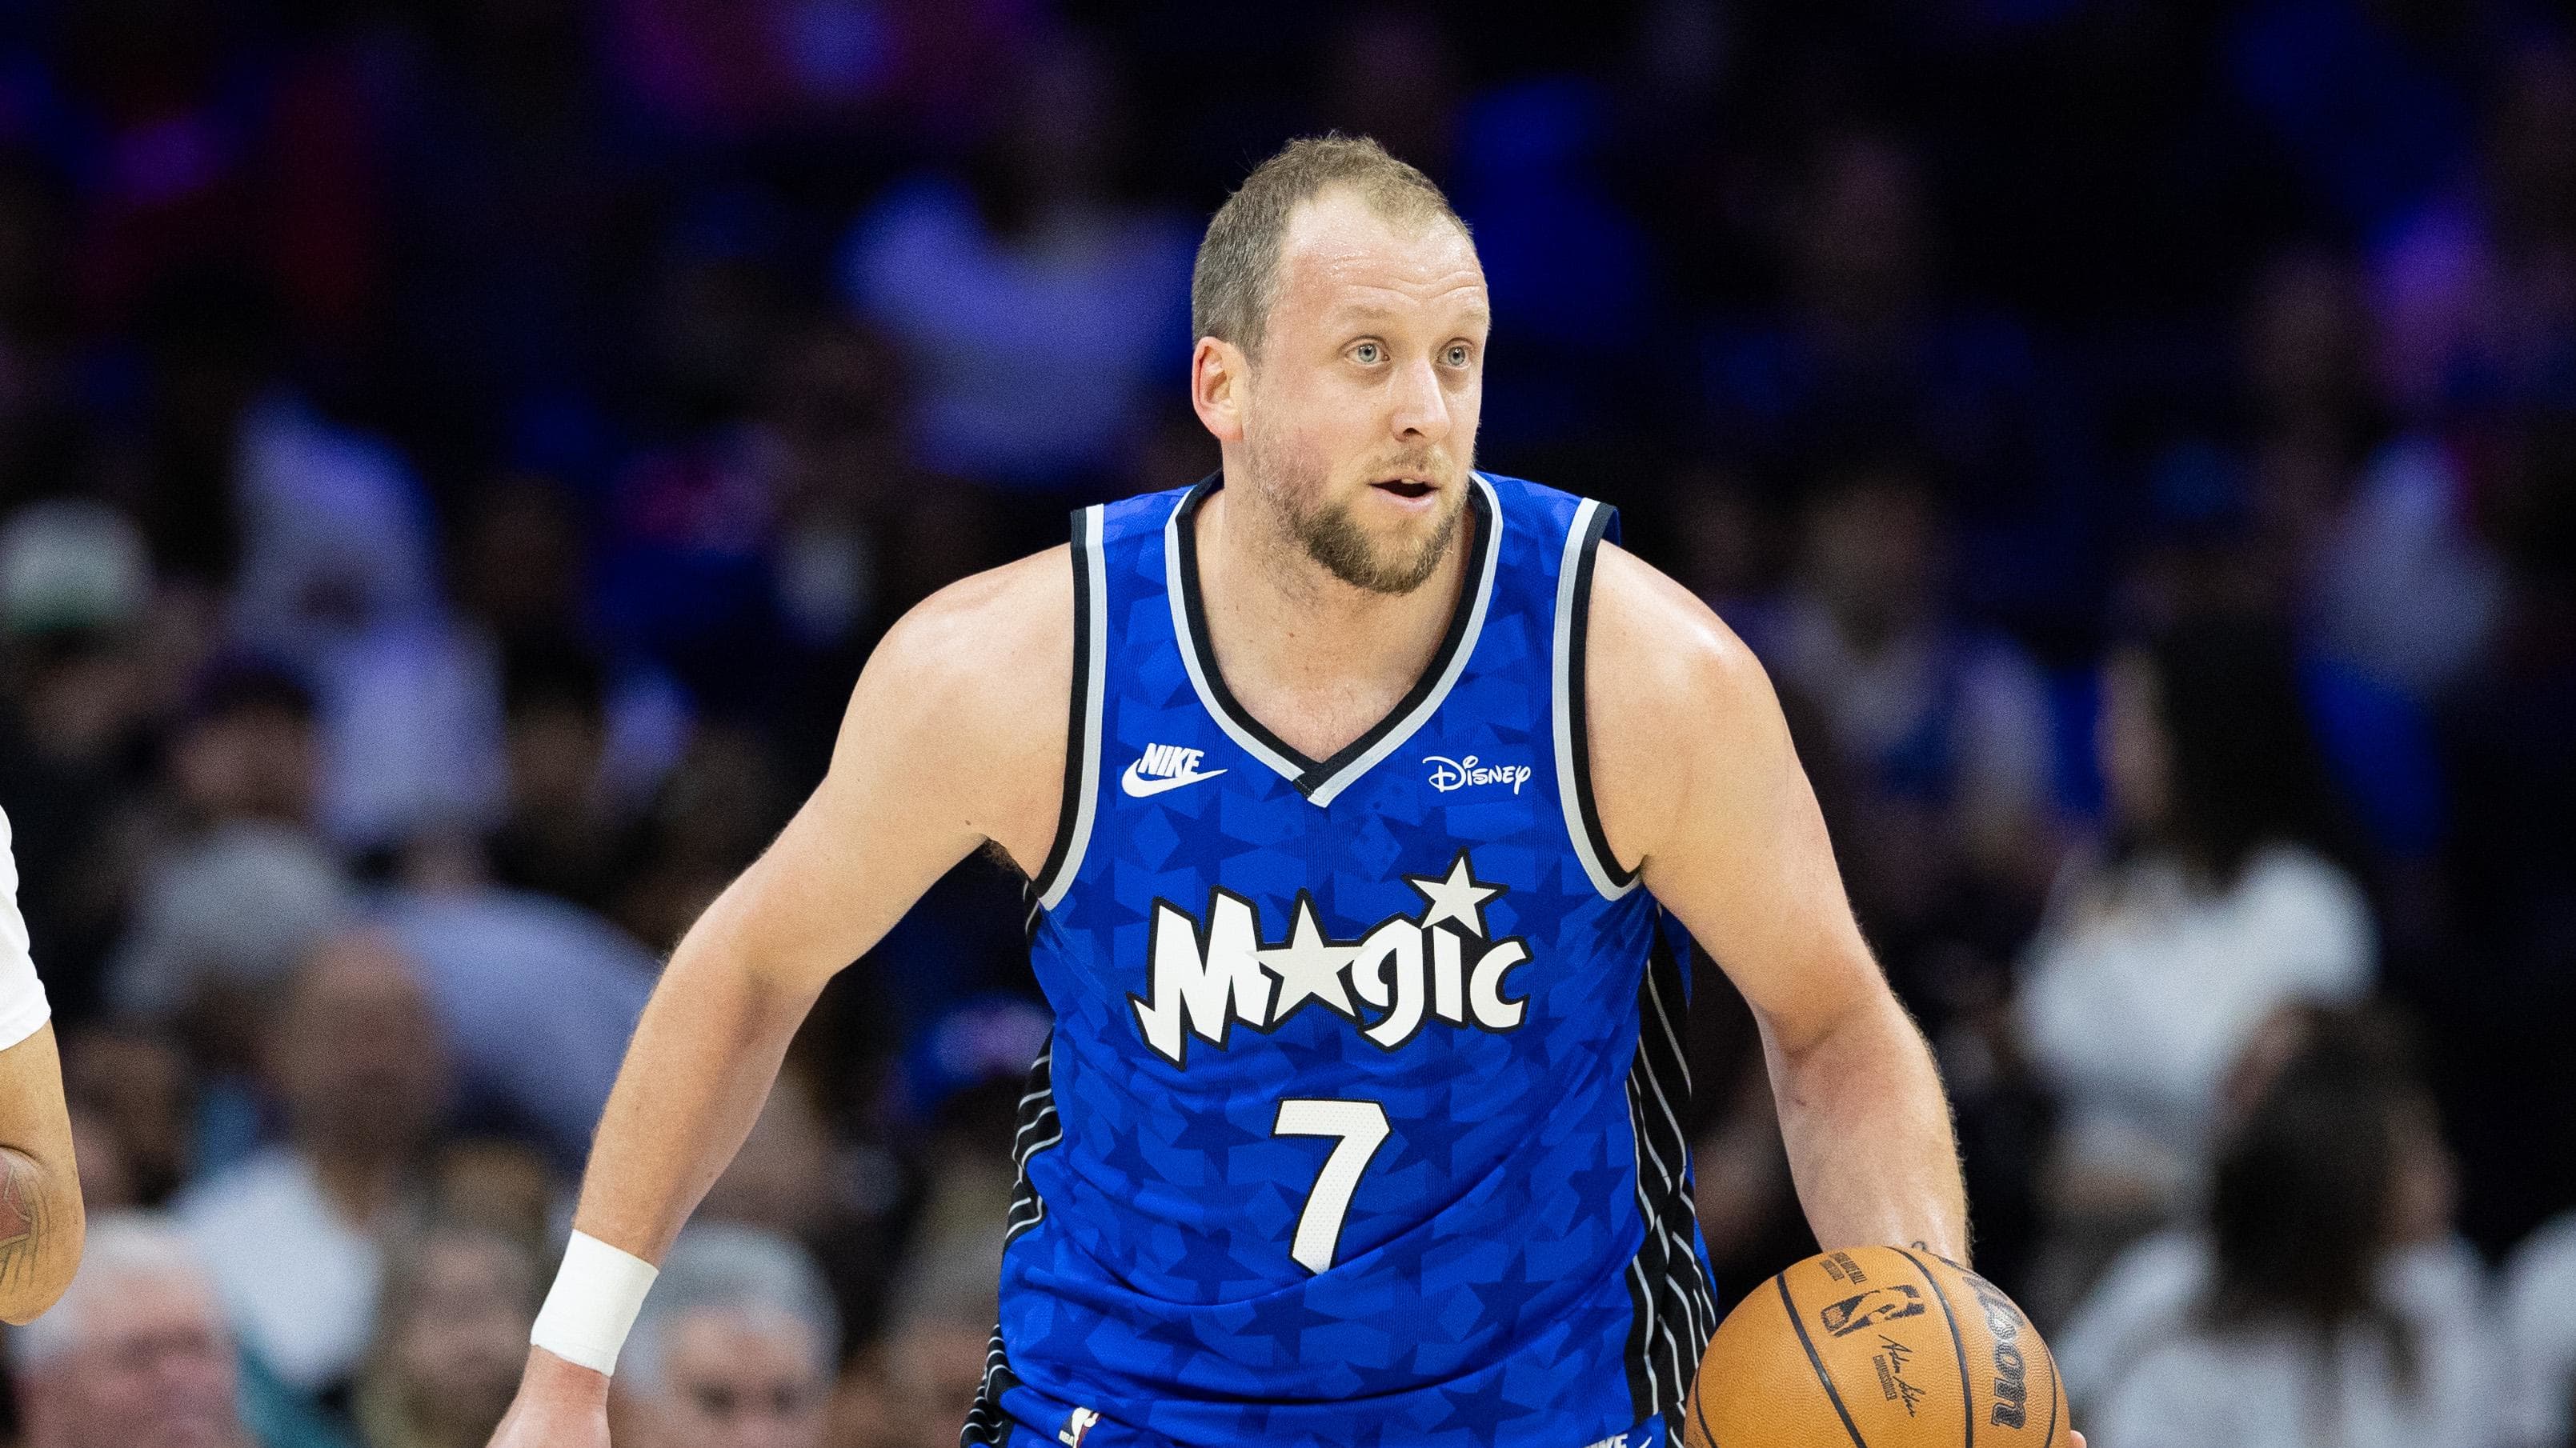 Why Magic SG Joe Ingles is ‘Very Important’ to Team’s Success